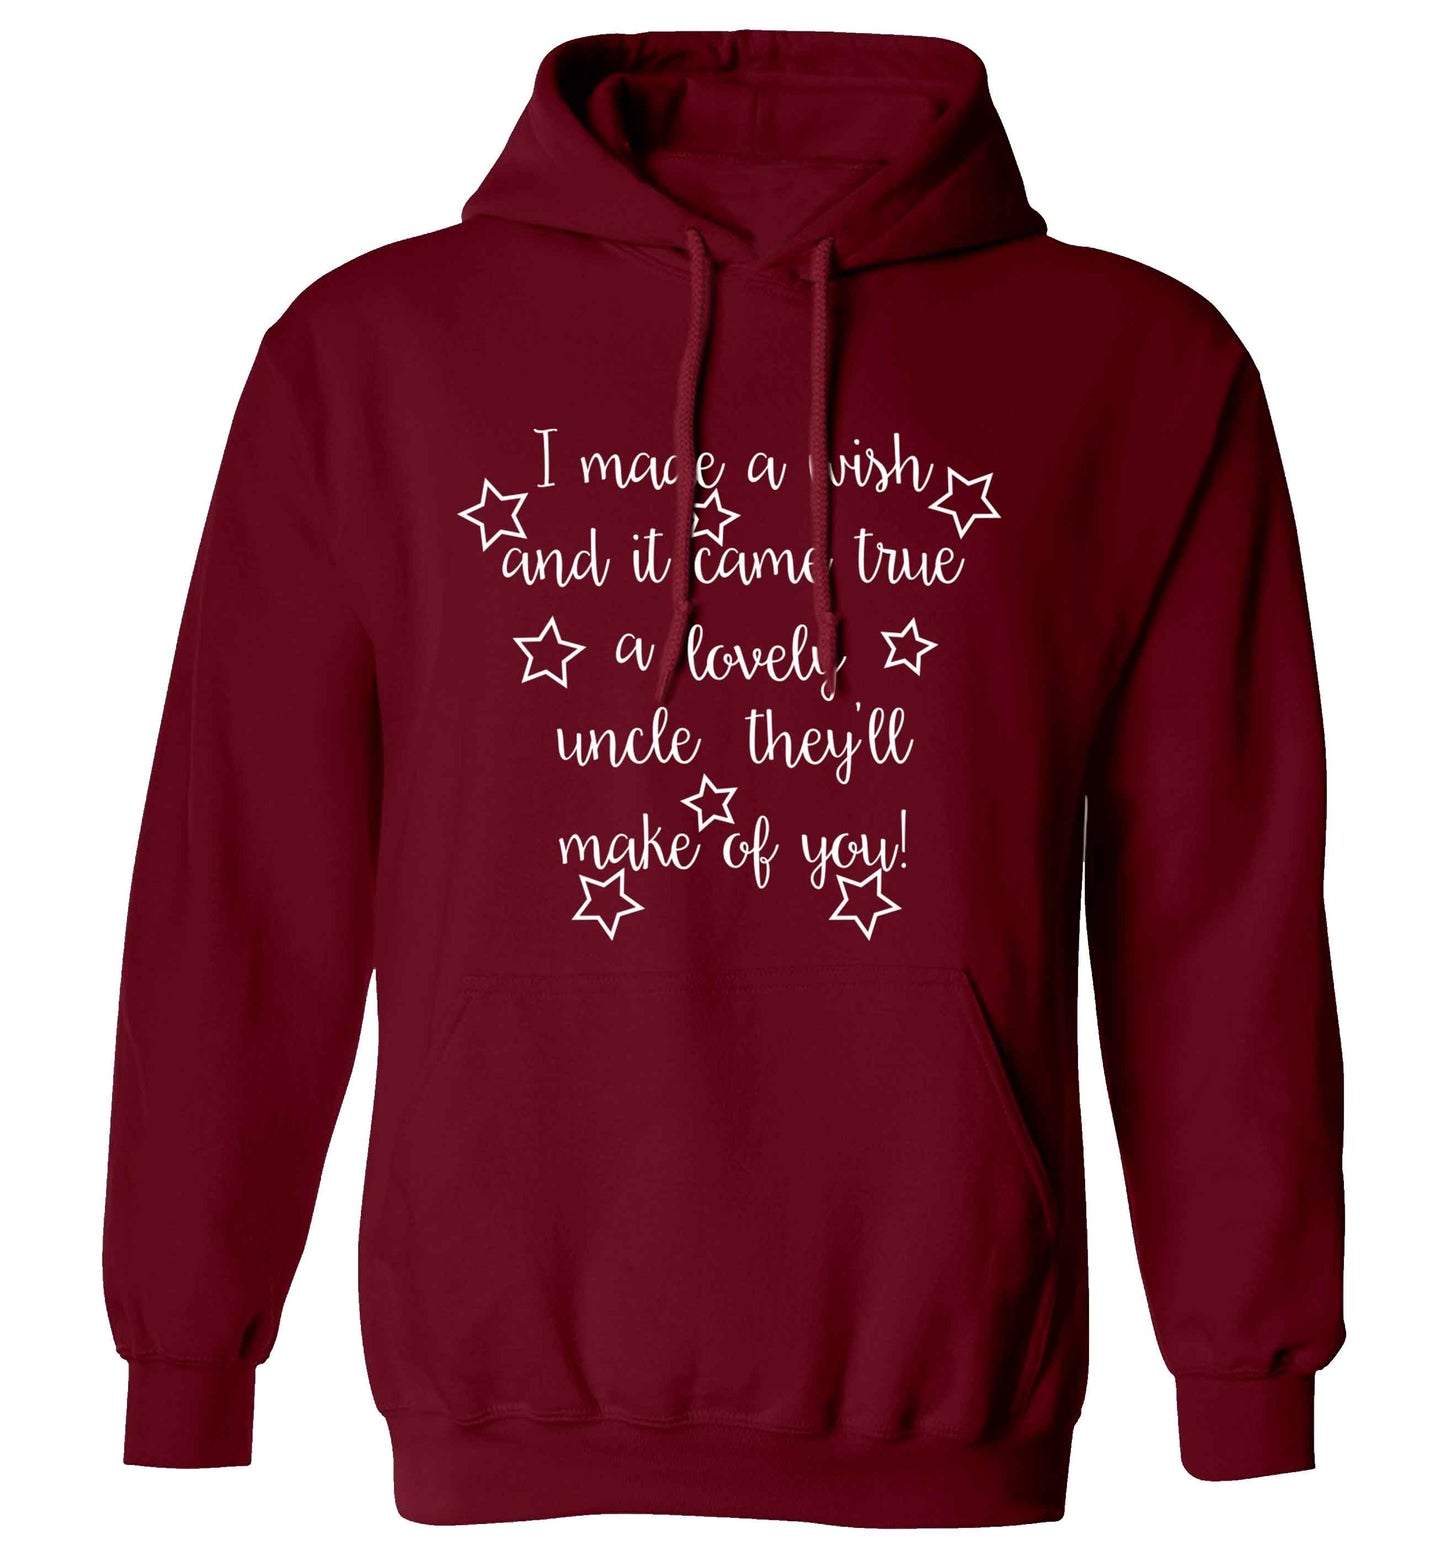 I made a wish and it came true a lovely uncle they'll make of you! adults unisex maroon hoodie 2XL